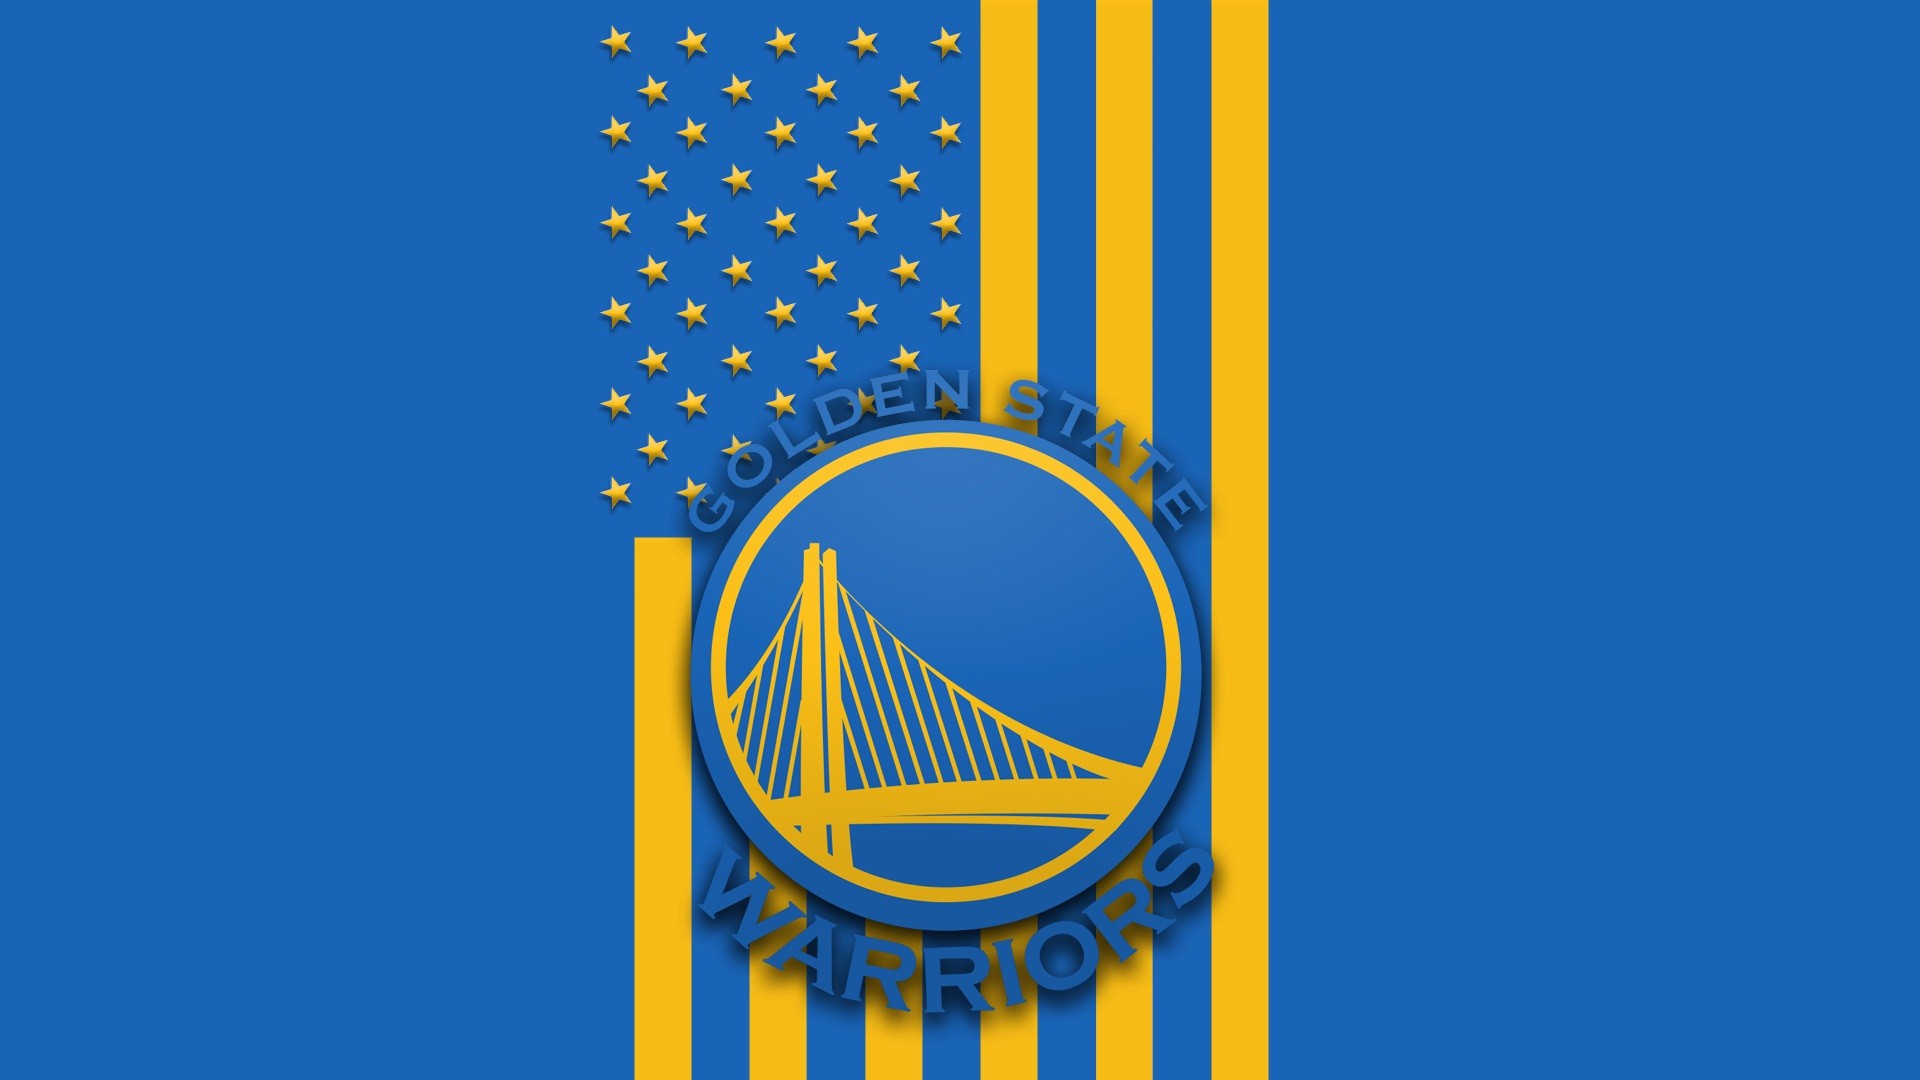 Windows Wallpaper Golden State Warriors Logo with image dimensions 1920x1080 pixel. You can make this wallpaper for your Desktop Computer Backgrounds, Windows or Mac Screensavers, iPhone Lock screen, Tablet or Android and another Mobile Phone device